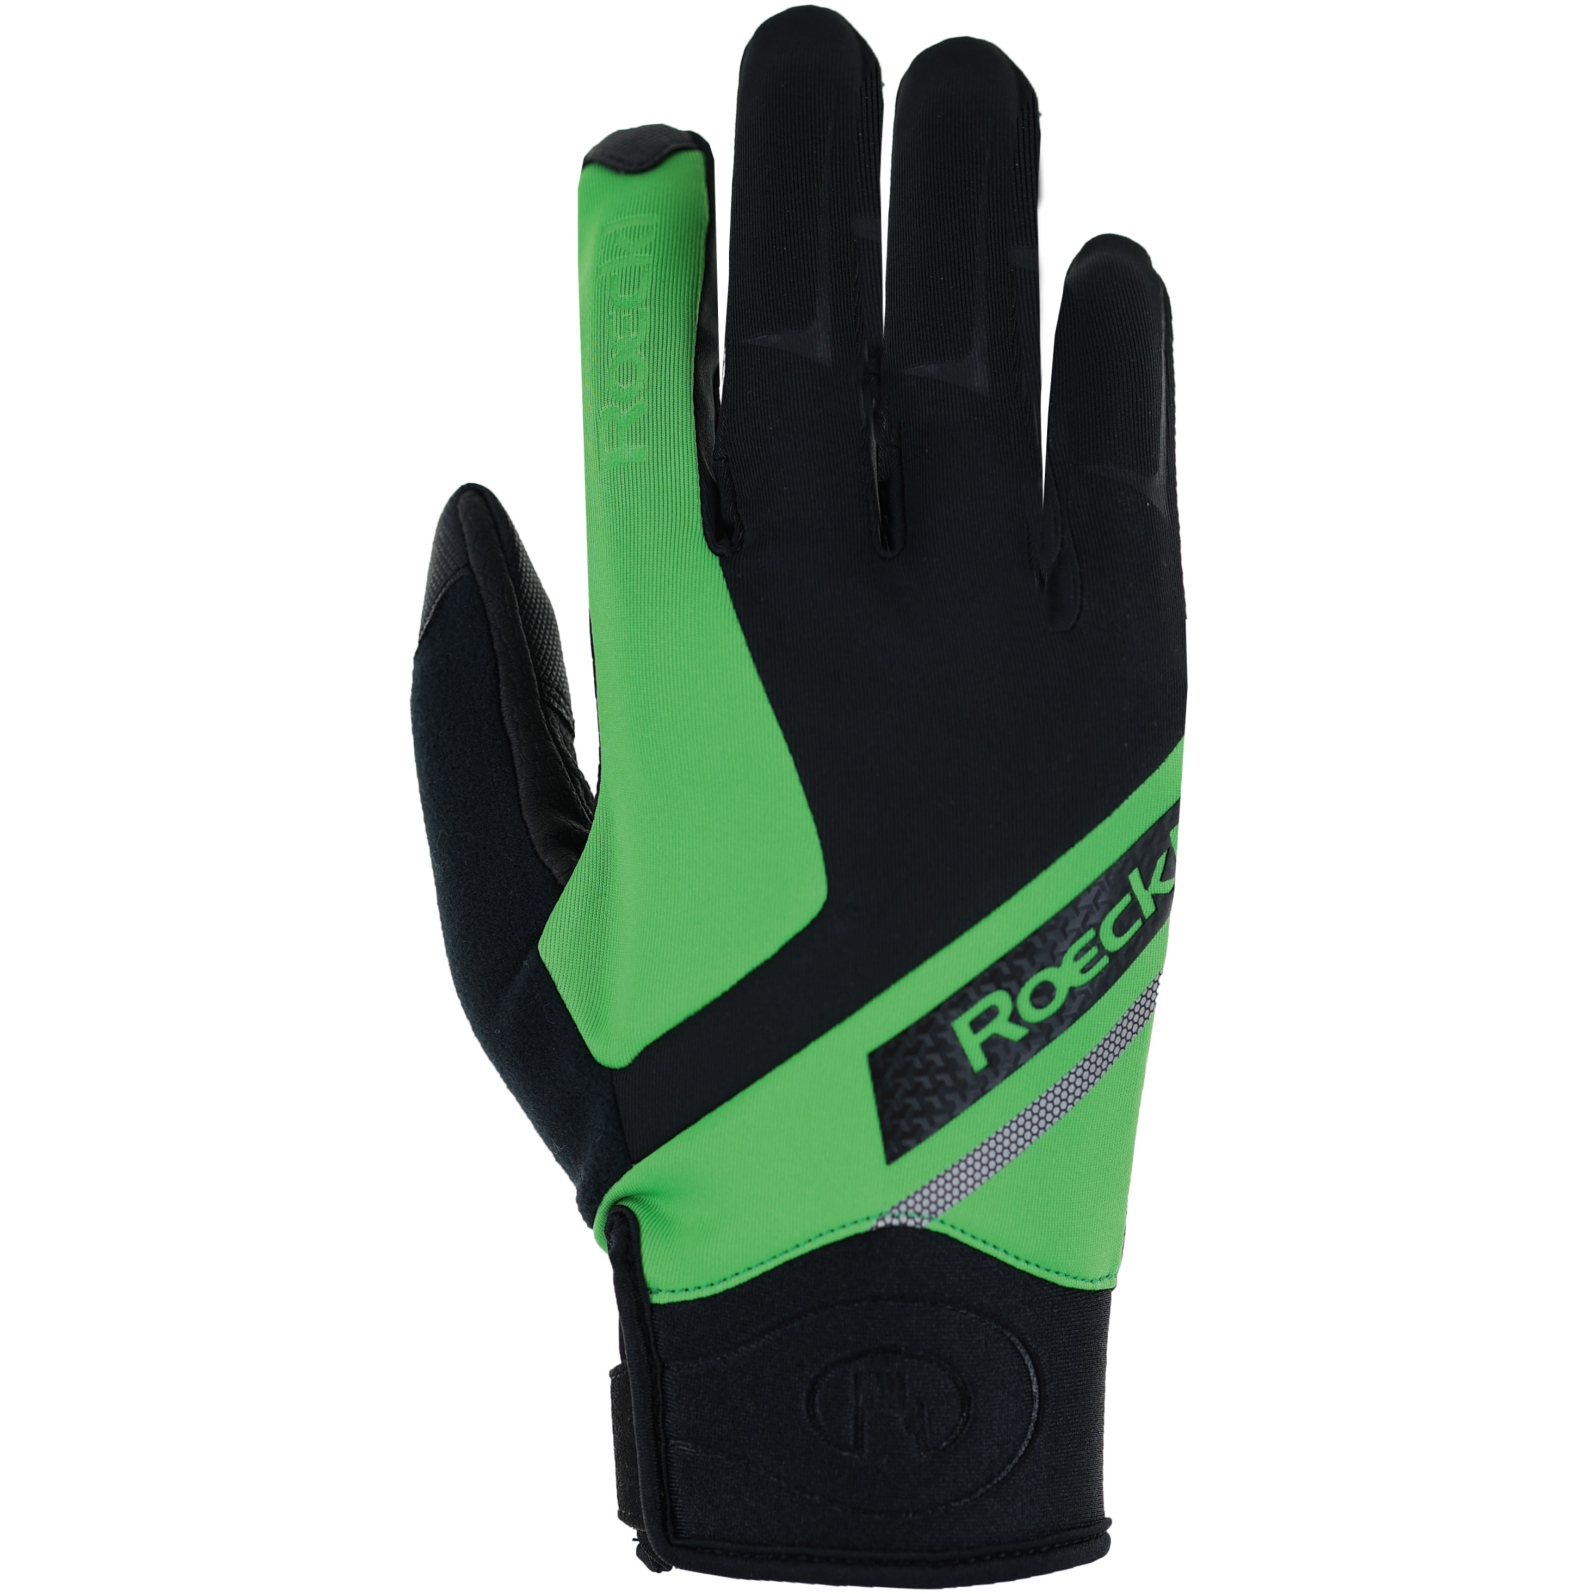 Picture of Roeckl Sports Lidhult Winter Gloves - black/classic green 9020